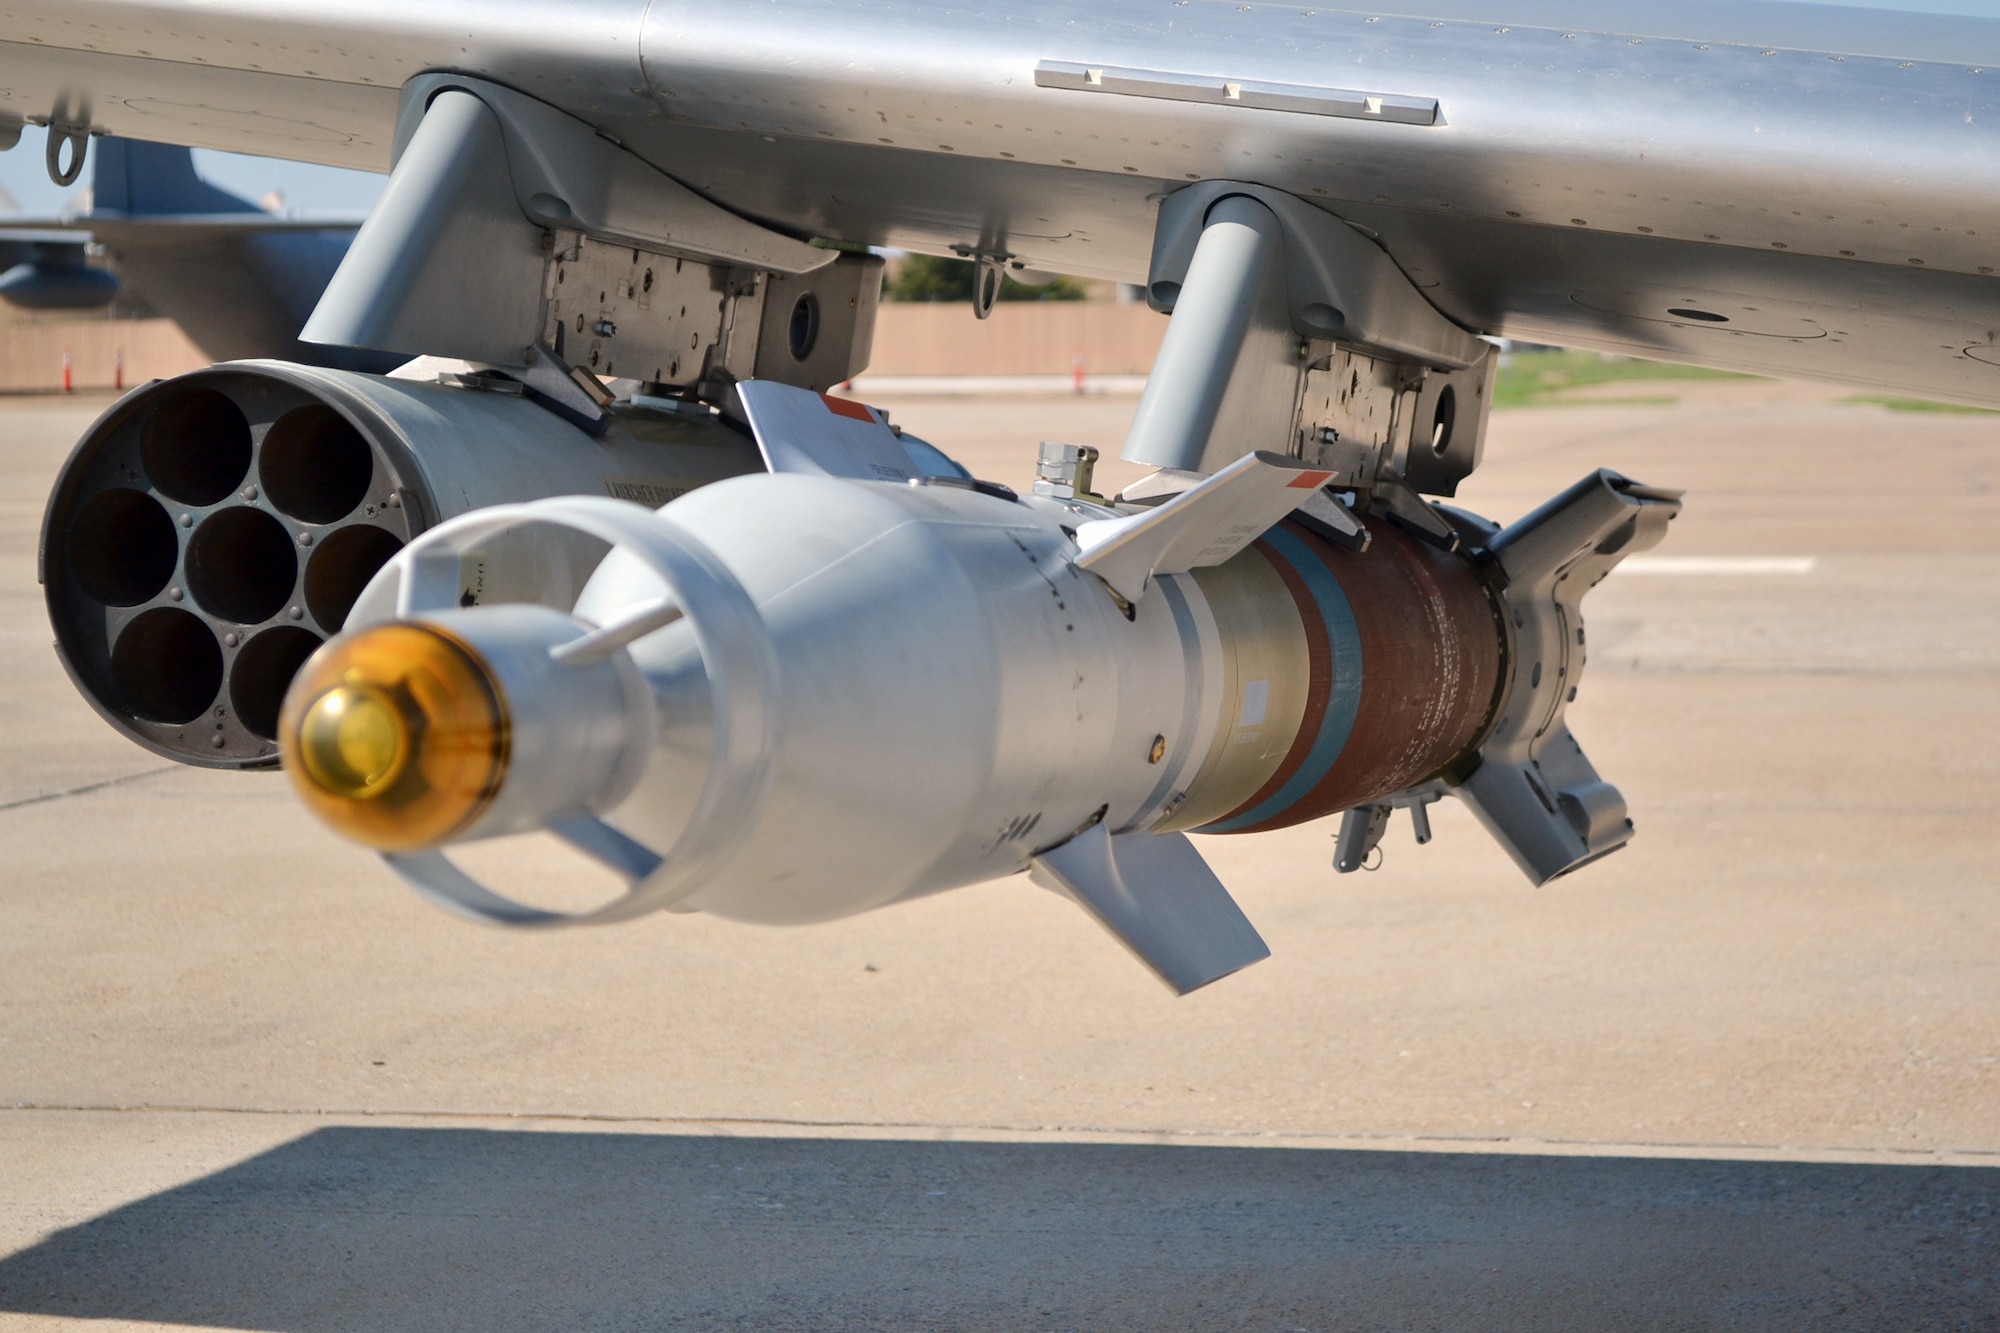 The AT-6 can carry anything from traditional dumb bombs like the MK-82 up to GPS guided munitions, up to a 500-pound bomb. (Official U.S. Air Force photo by Airman 1st Class Brigette Waltermire)